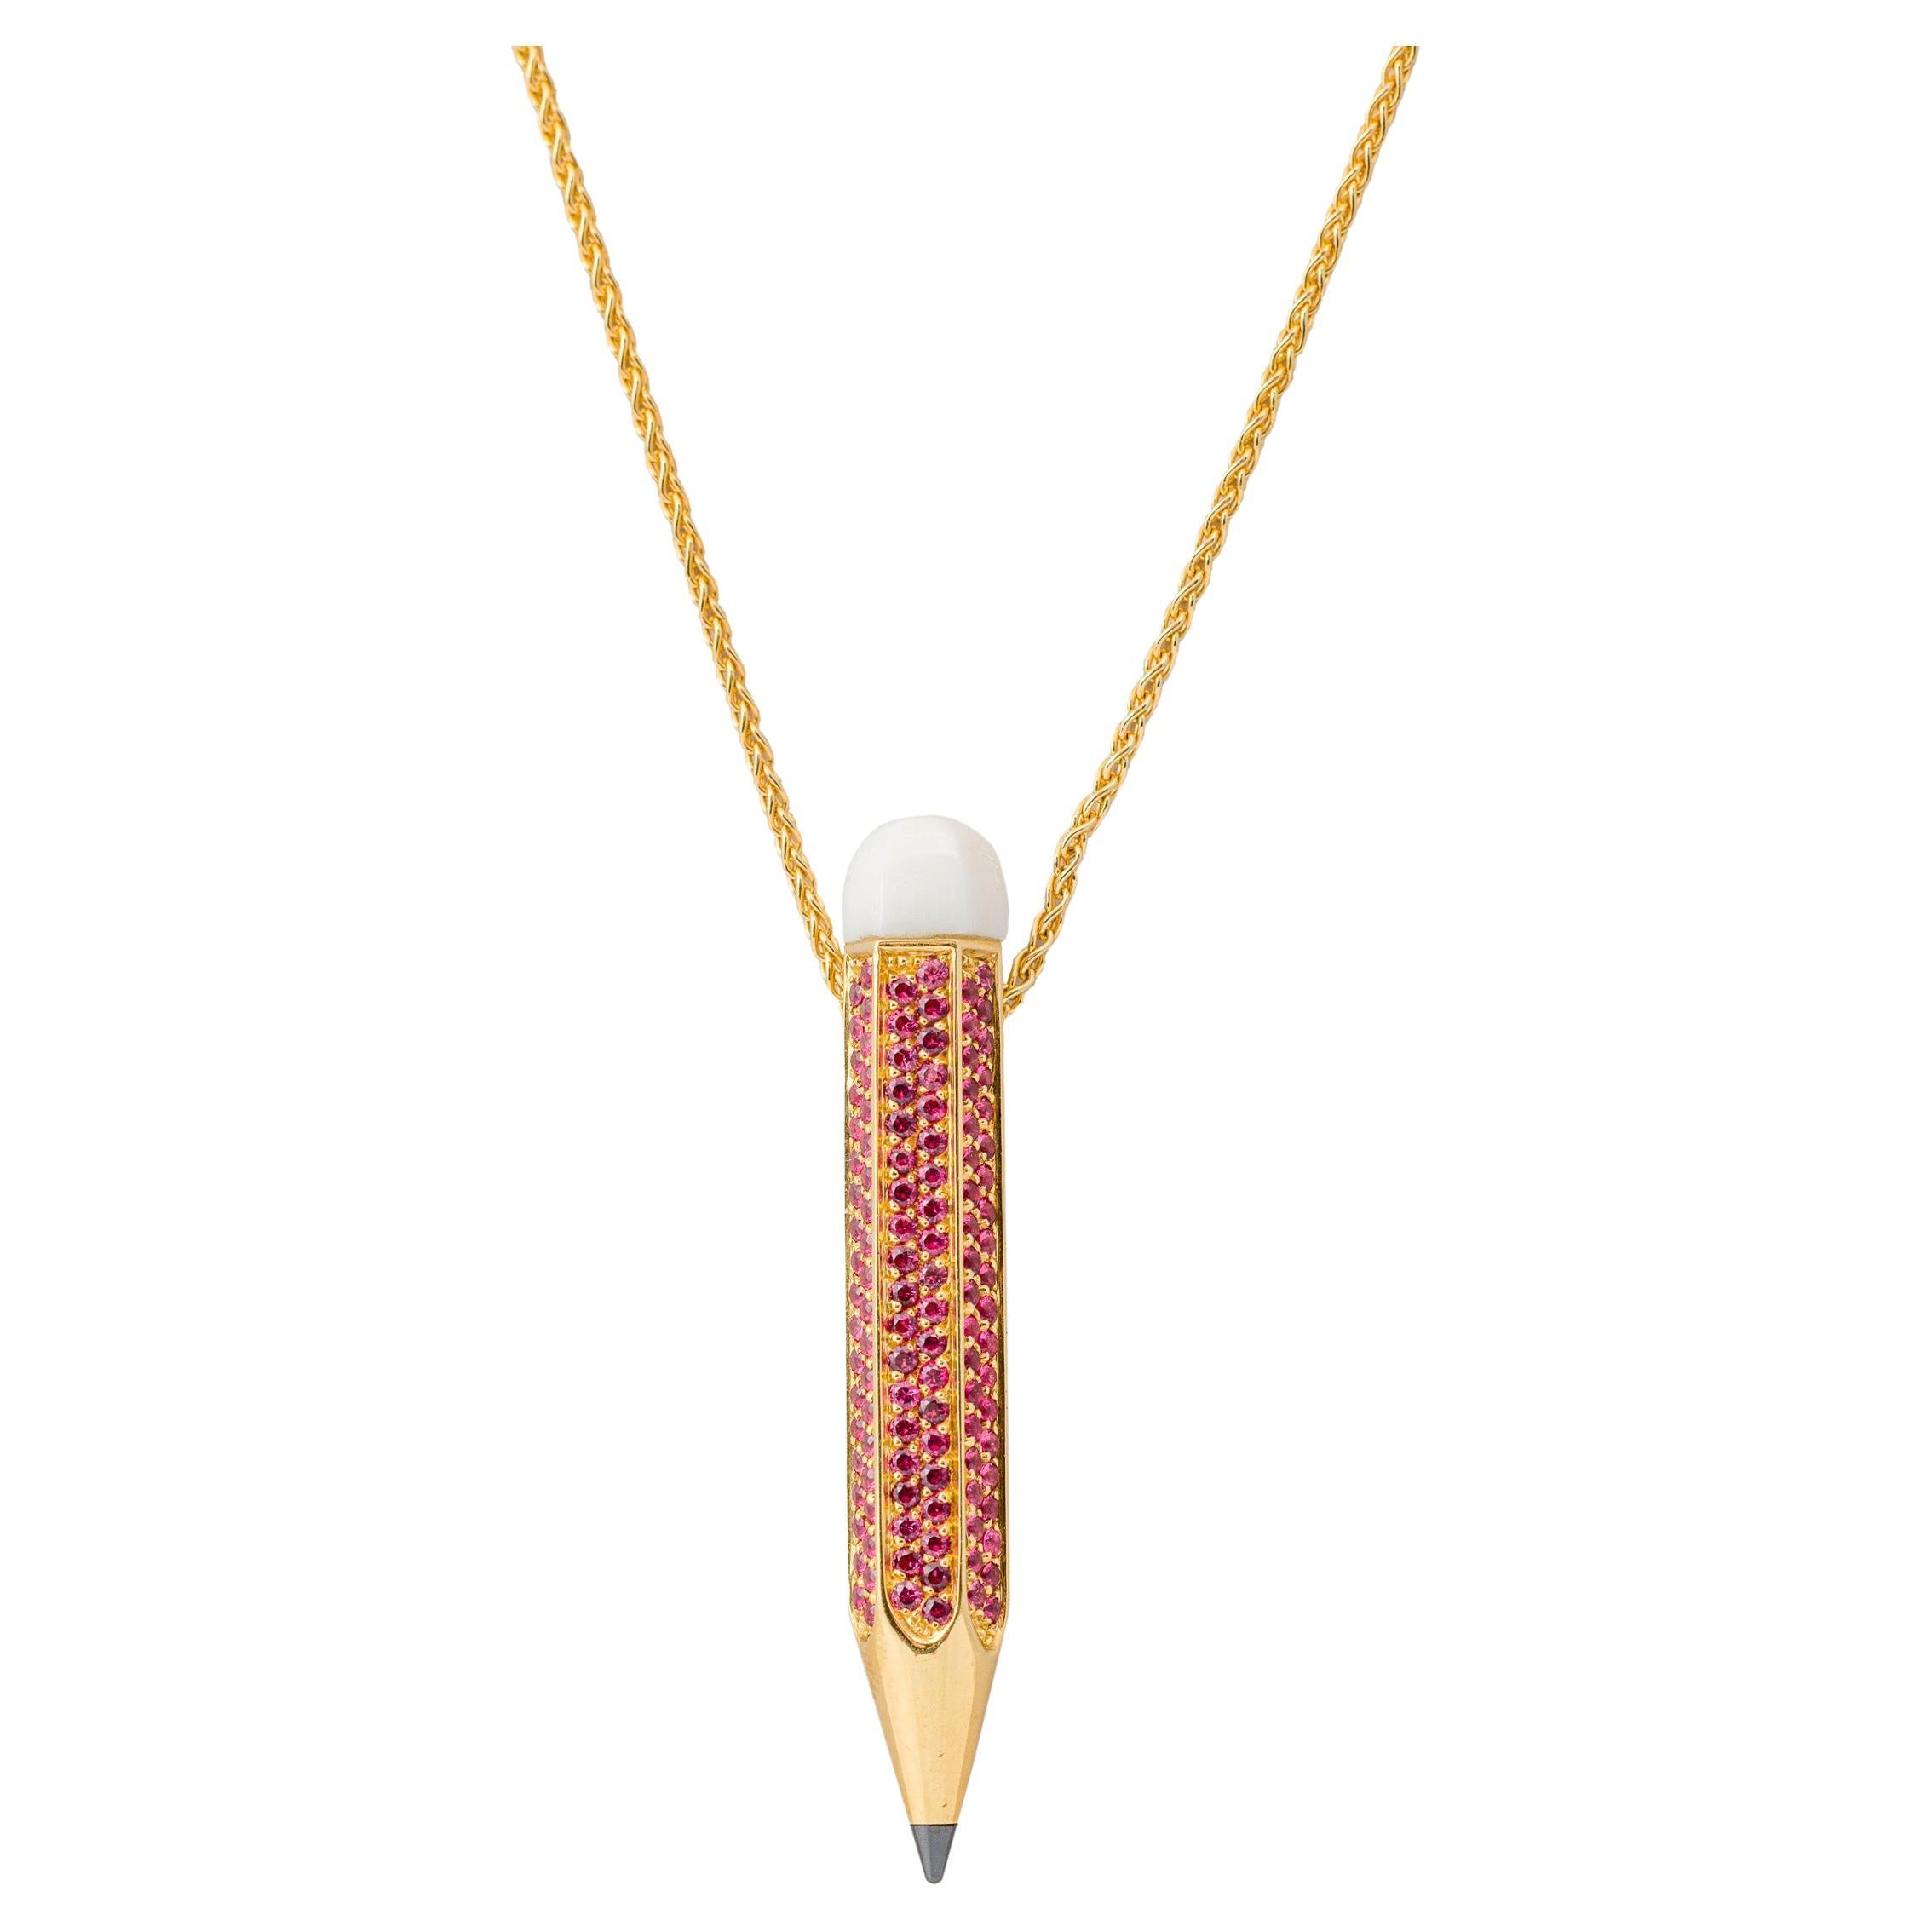 "Costis" Pencil Pendant - Pave' 1.97 cts Red Spinels, Diamond Point, Coral 